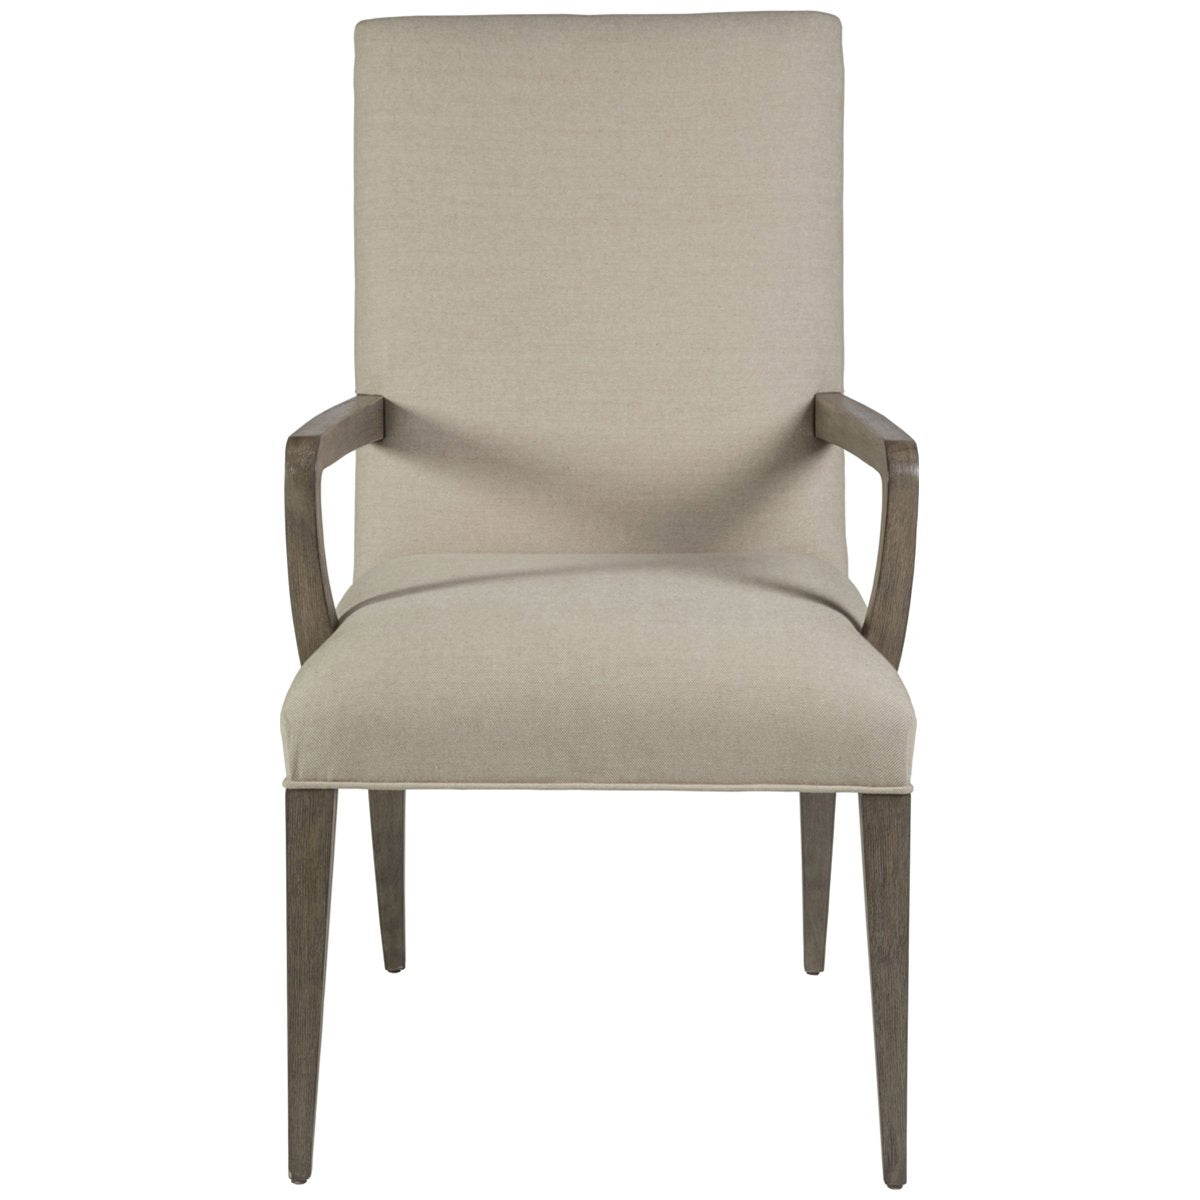 Artistica Home Madox Upholstered Arm Chair 2220-881